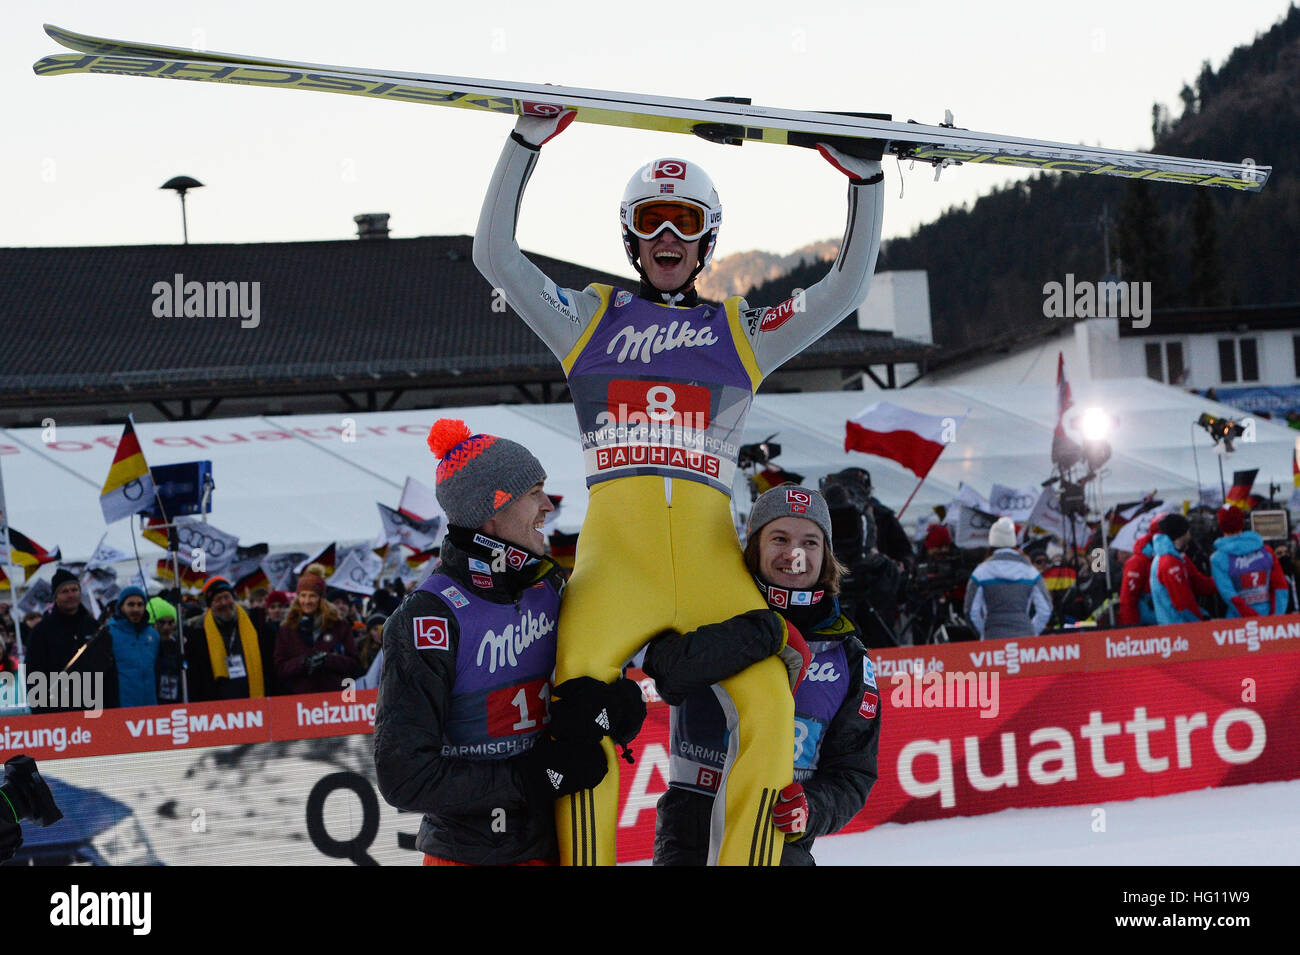 01.01.2017, Olympic Hill, Garmisch Partenkirchen, Germany. 4 Hills ski jumping tournament. Norwegian ski jumper Daniel-Andre Tande (C) cheers after his victory in the New Year's jump next to teammates Andreas Stjernen (L) and Tom Hilde, who are lifting him up, at the Four Hills Tournament in Nordic skiing/ski jumping in Garmisch-Partenkirchen, Germany, 1st January 2017. Stock Photo